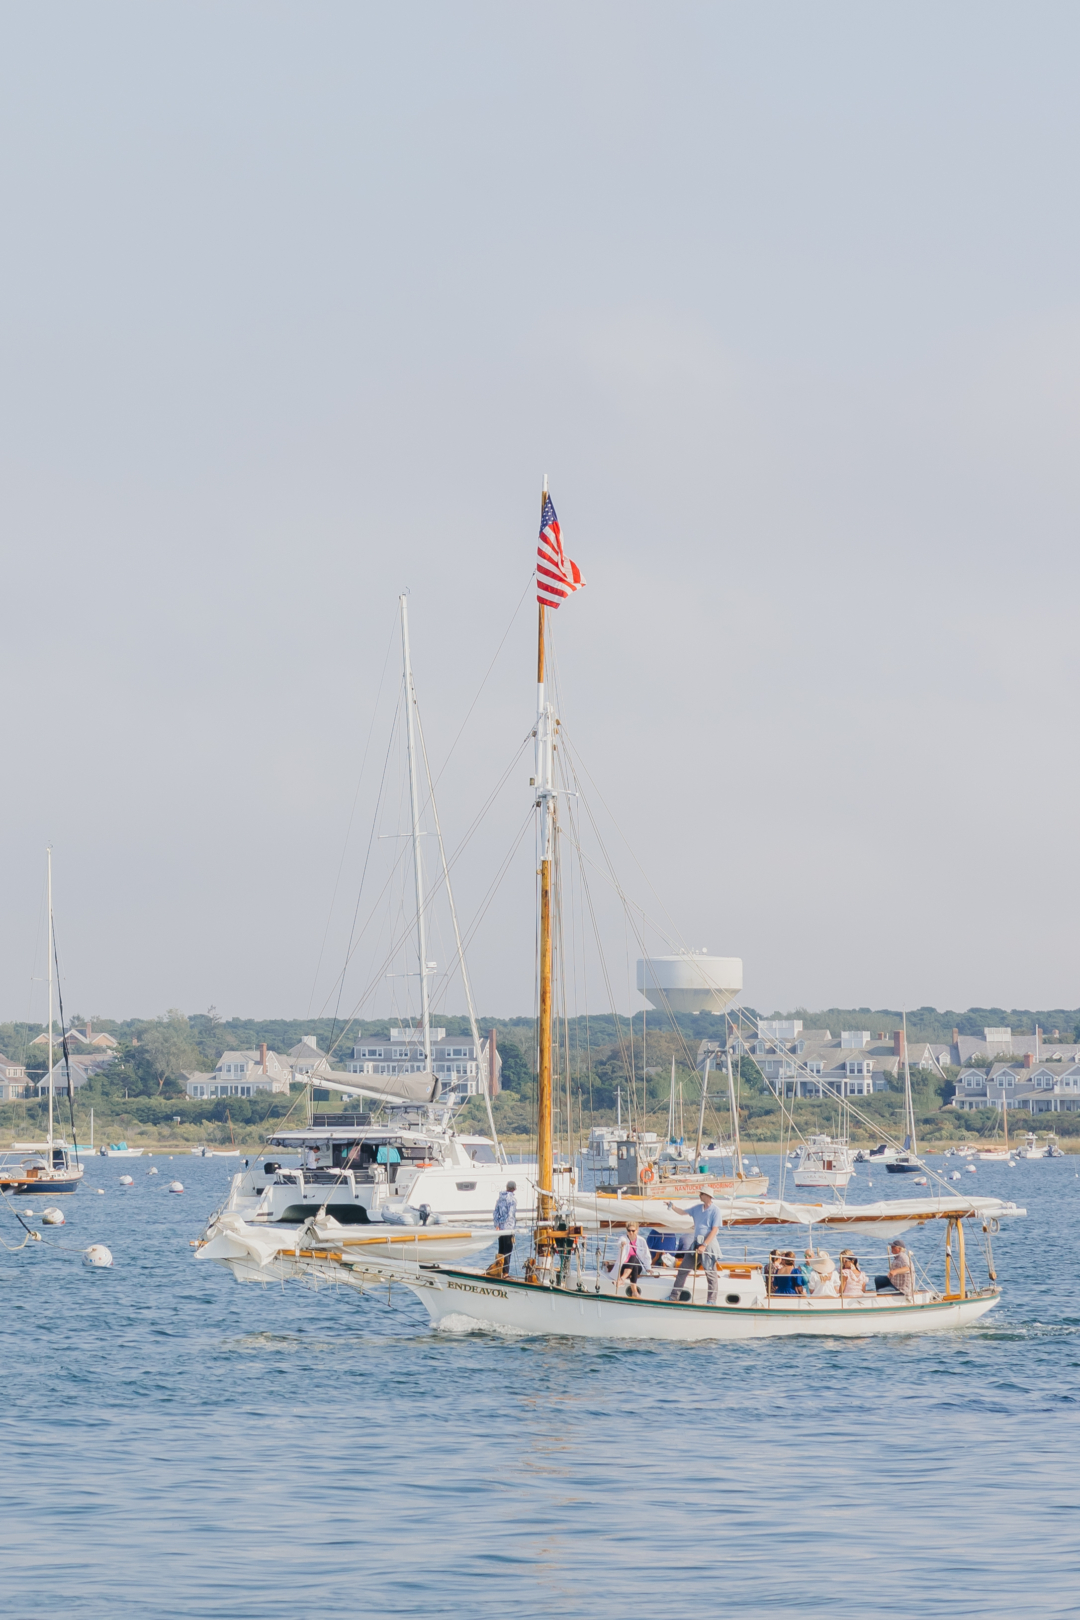 Travel: Danielle's 40th Birthday Girls' Getaway at The Nantucket Hotel with Palm Beach Lately